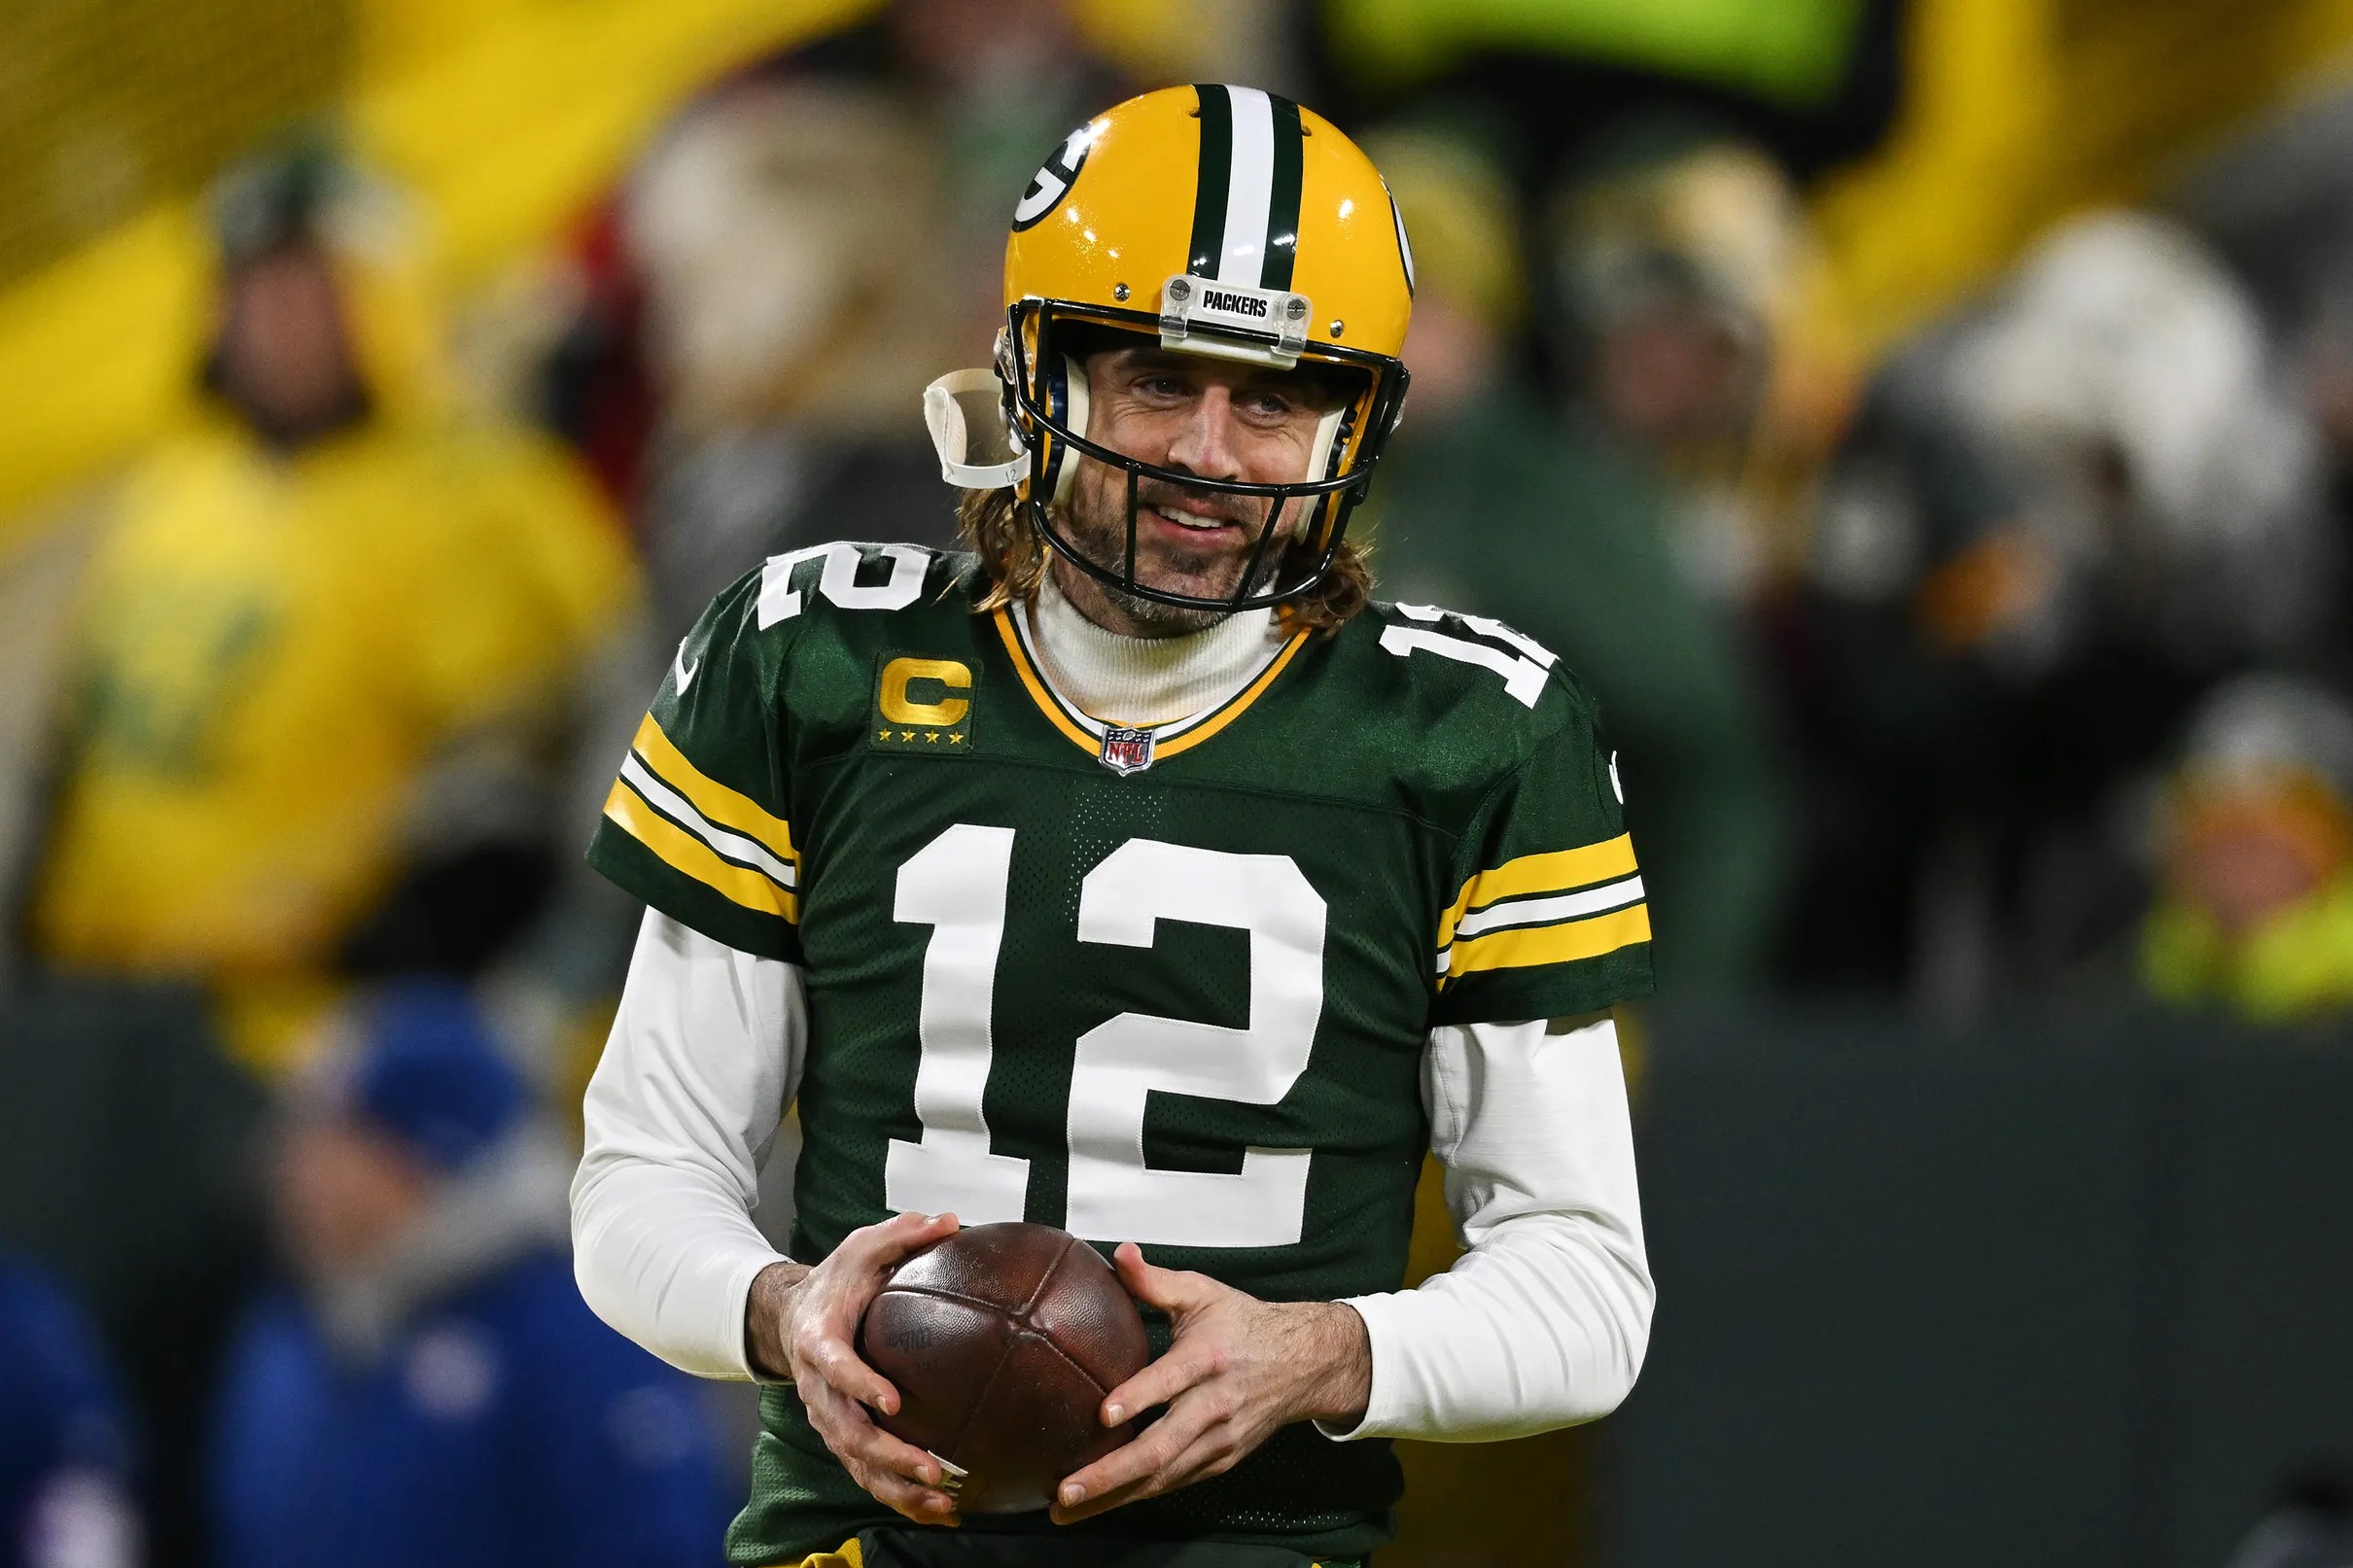 Aaron Rodgers signs contract extension, reduces 2022 cap hit by 18M